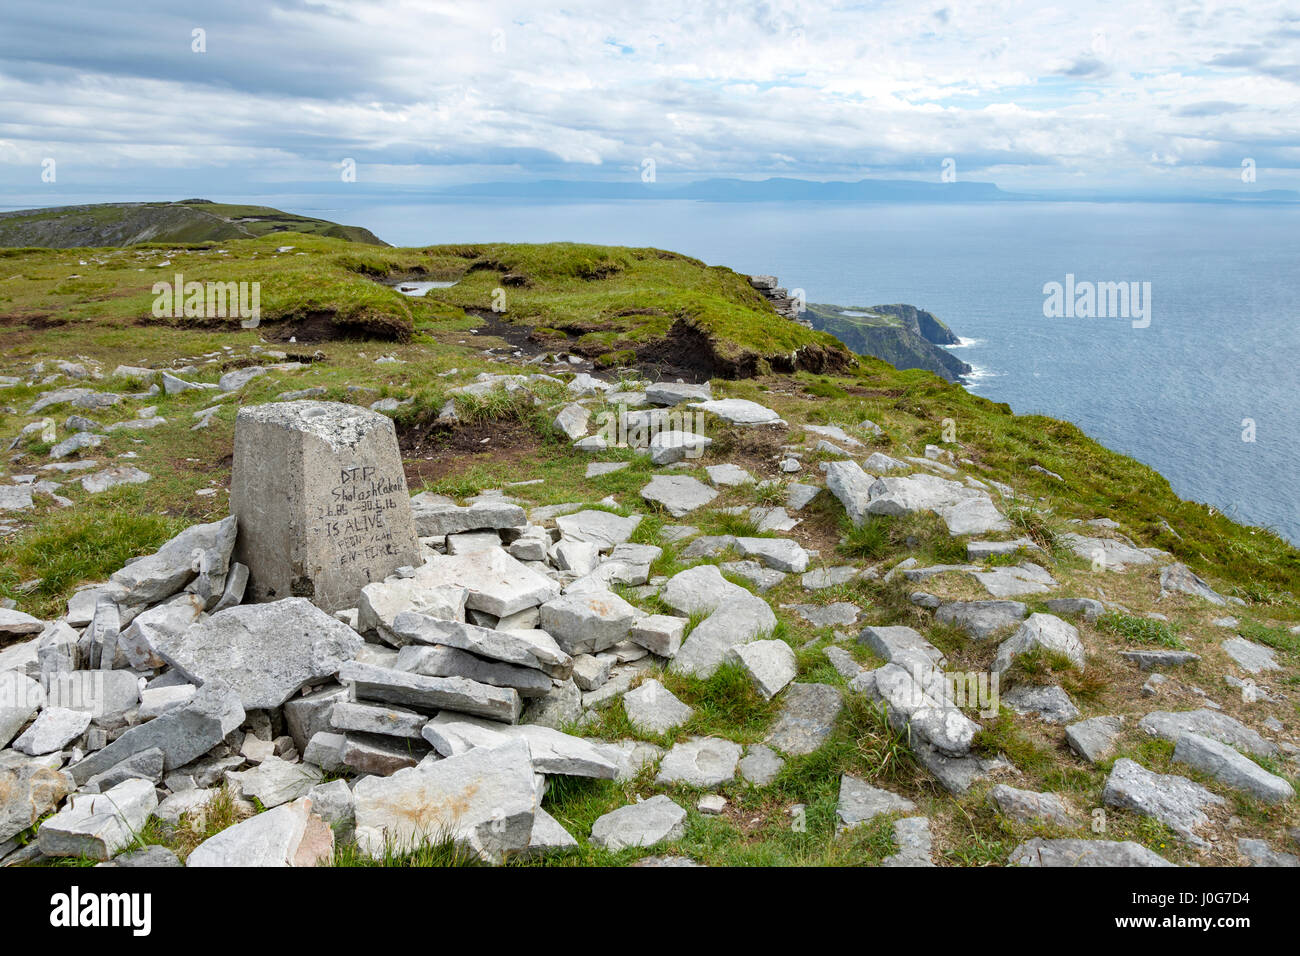 At the summit of Slieve League  (595m), County Donegal, Ireland Stock Photo